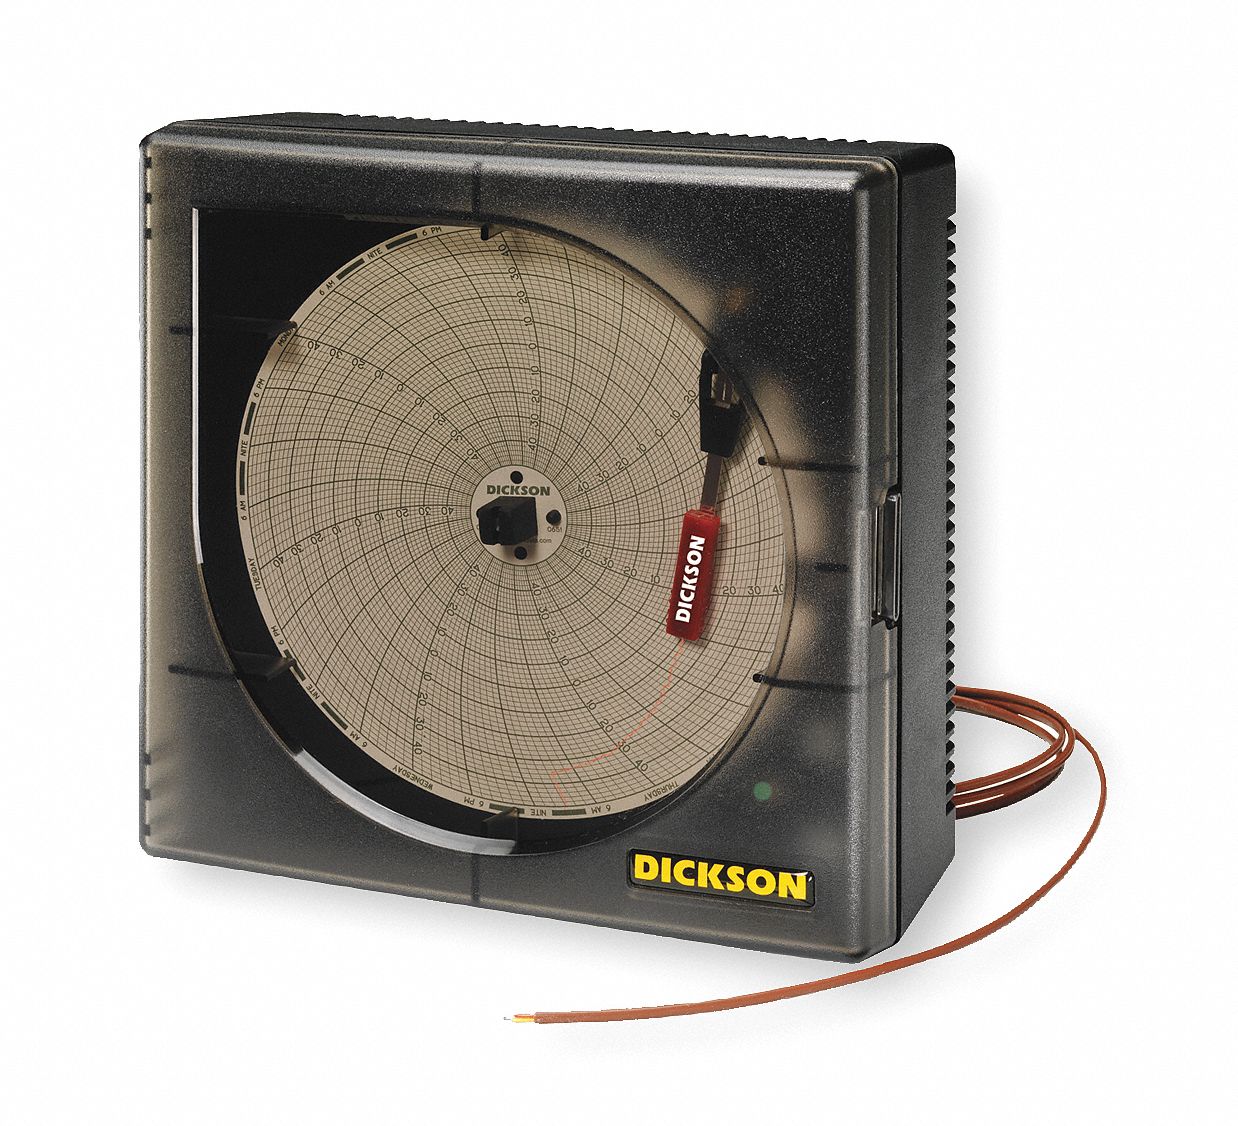 Dickson KT602 Temperature 6" Chart Recorder With 120v AC Adaptor for sale online 